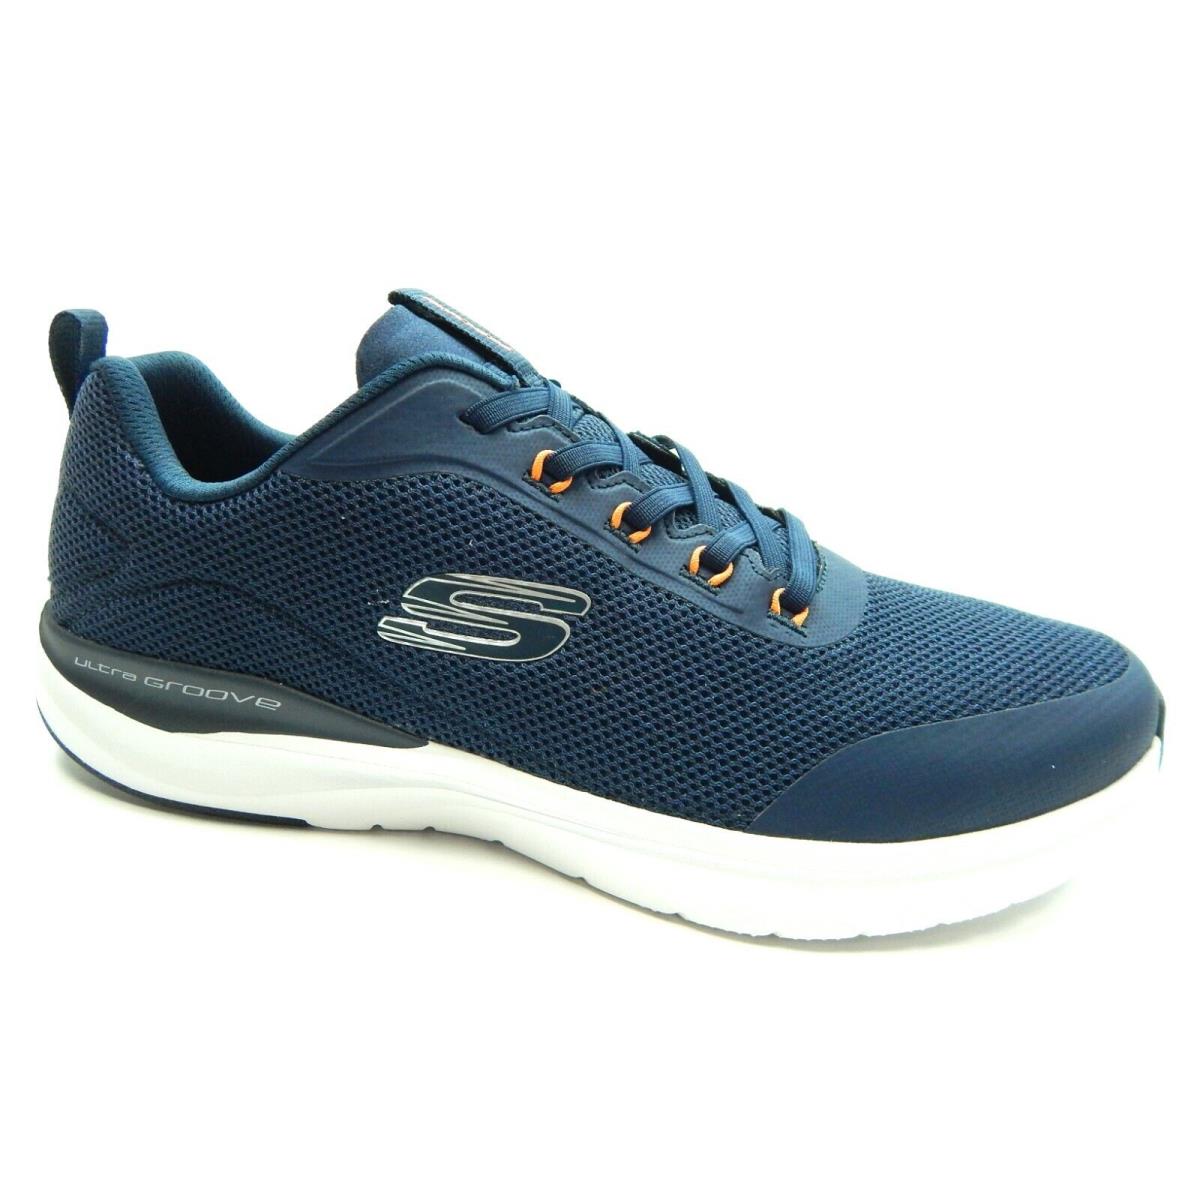 Skechers Ultra Groove Navy Air Cooled Memory Foam Men Shoes Size 13 - NAVY